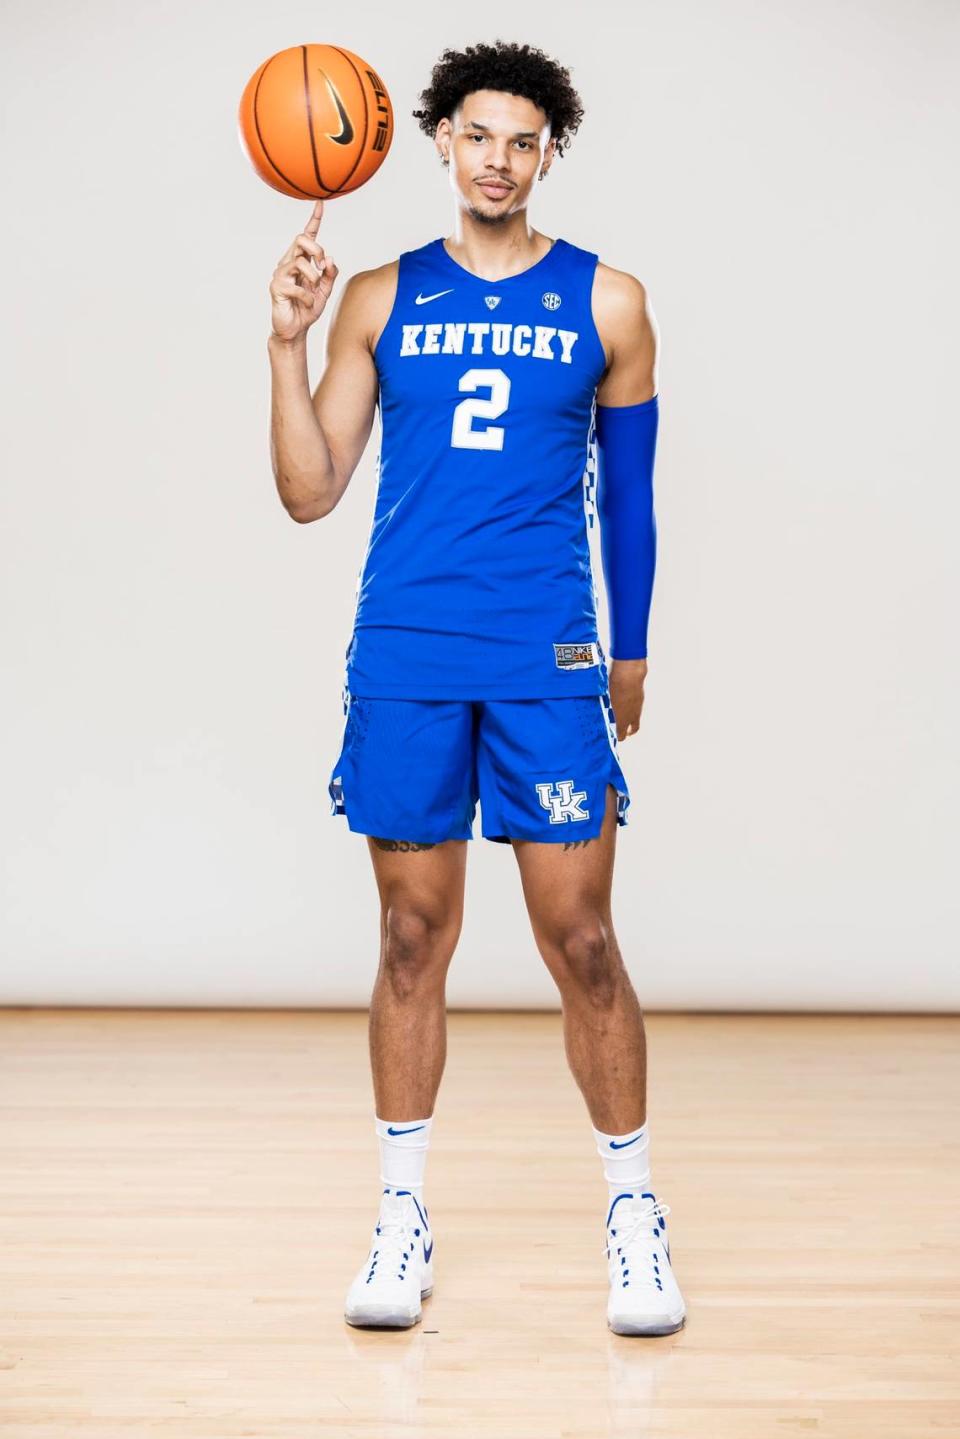 Fifth-year college basketball forward Tre Mitchell committed to the Kentucky men’s basketball program Monday afternoon. Mitchell is the first player this offseason to join UK from the NCAA transfer portal.